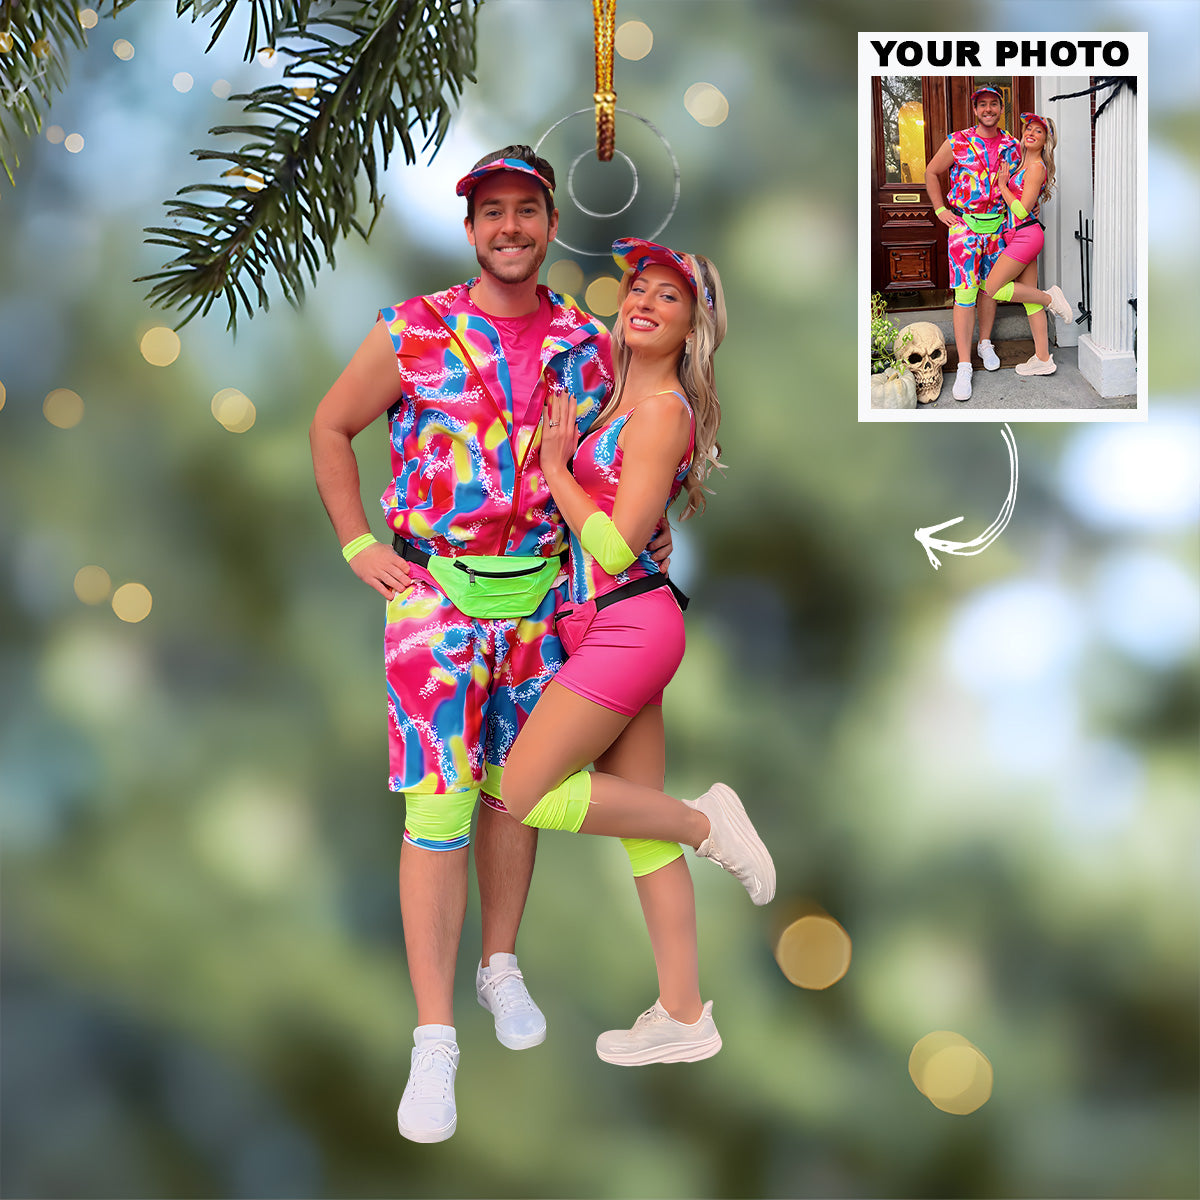 Customized Your Photo Ornament - Personalized Custom Photo Mica Ornament - Christmas Gift For Couples, Family Members